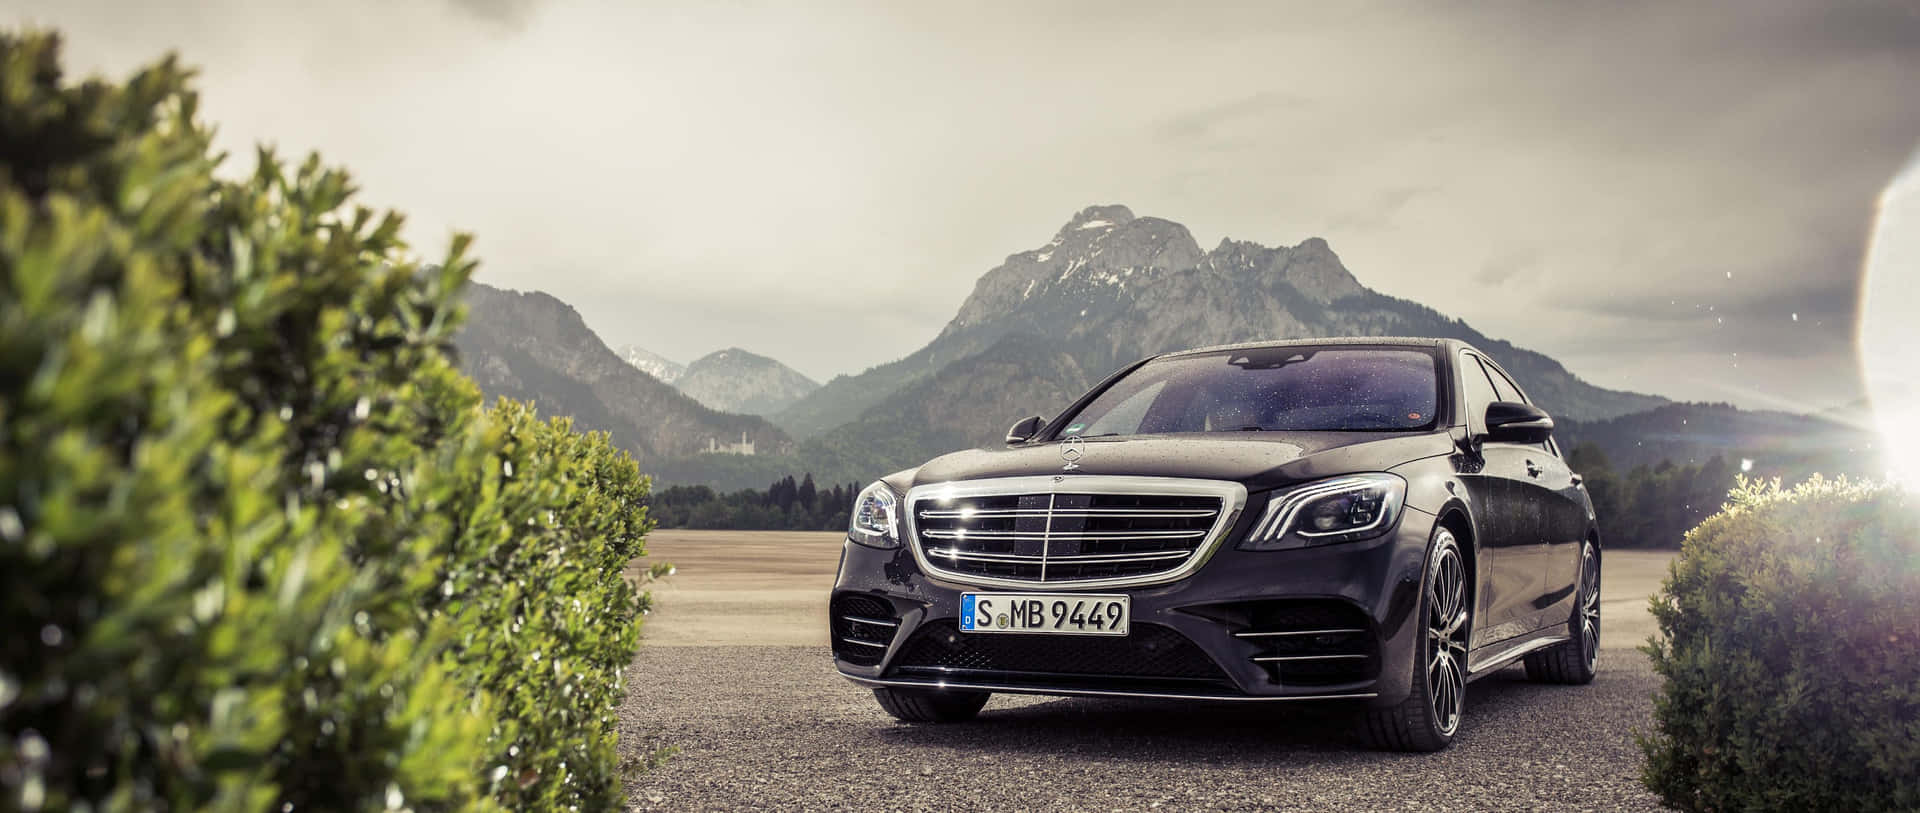 Mercedes S-class Parked In Front Of Mountains Wallpaper